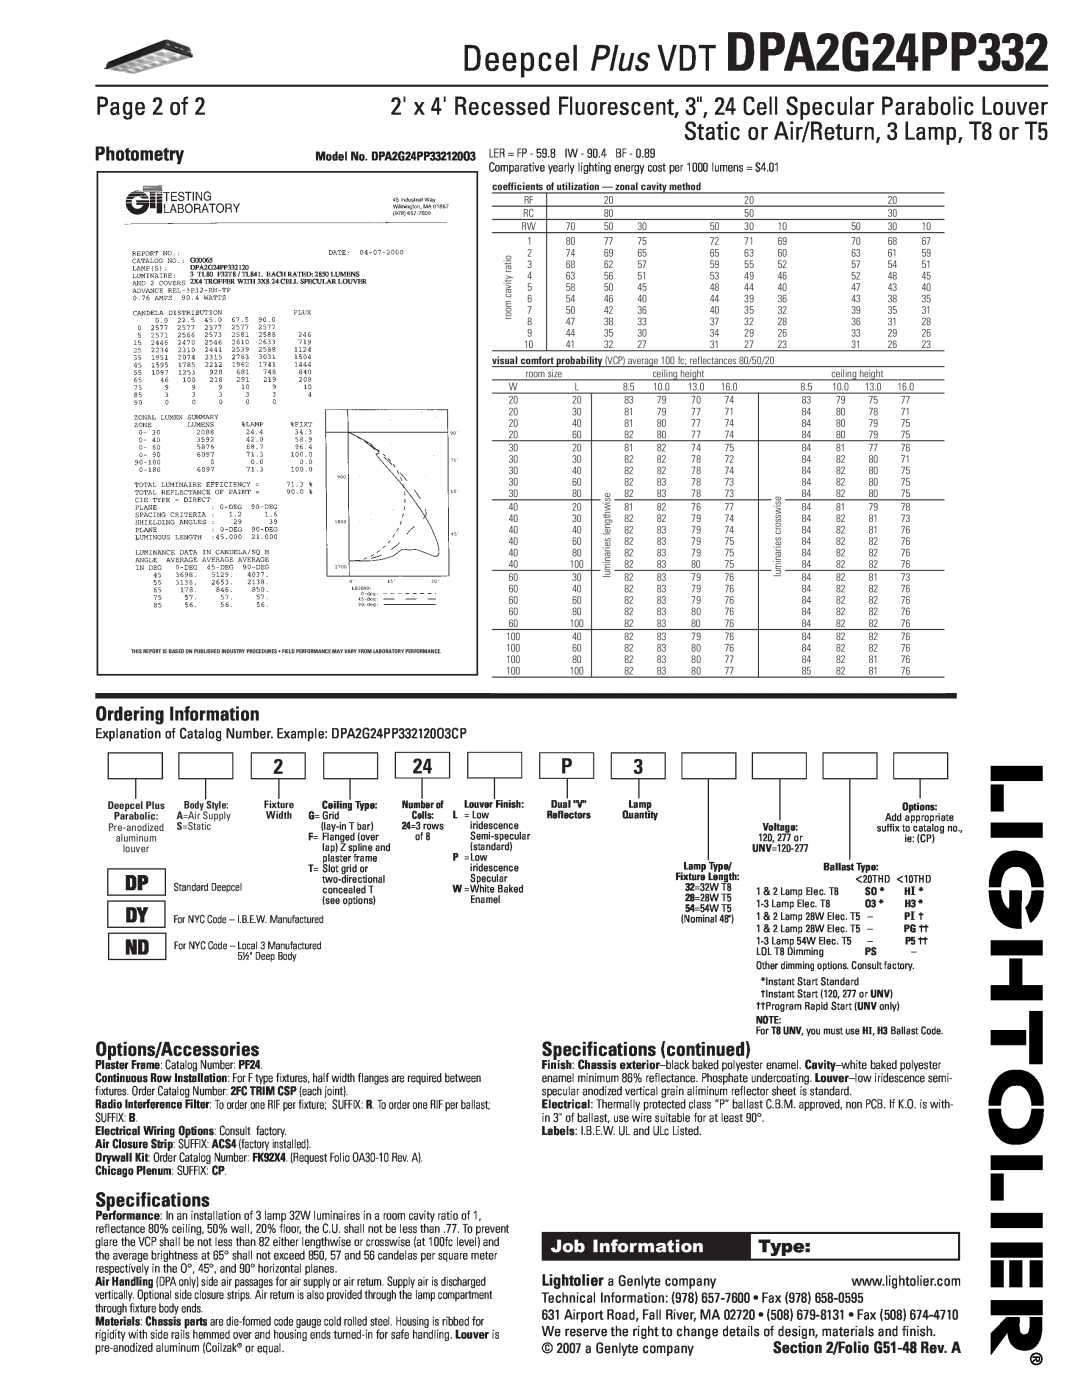 Lightolier DPA2G24PP332 Page 2 of, Static or Air/Return, 3 Lamp, T8 or T5, Photometry, Ordering Information, Dp Dy Nd 